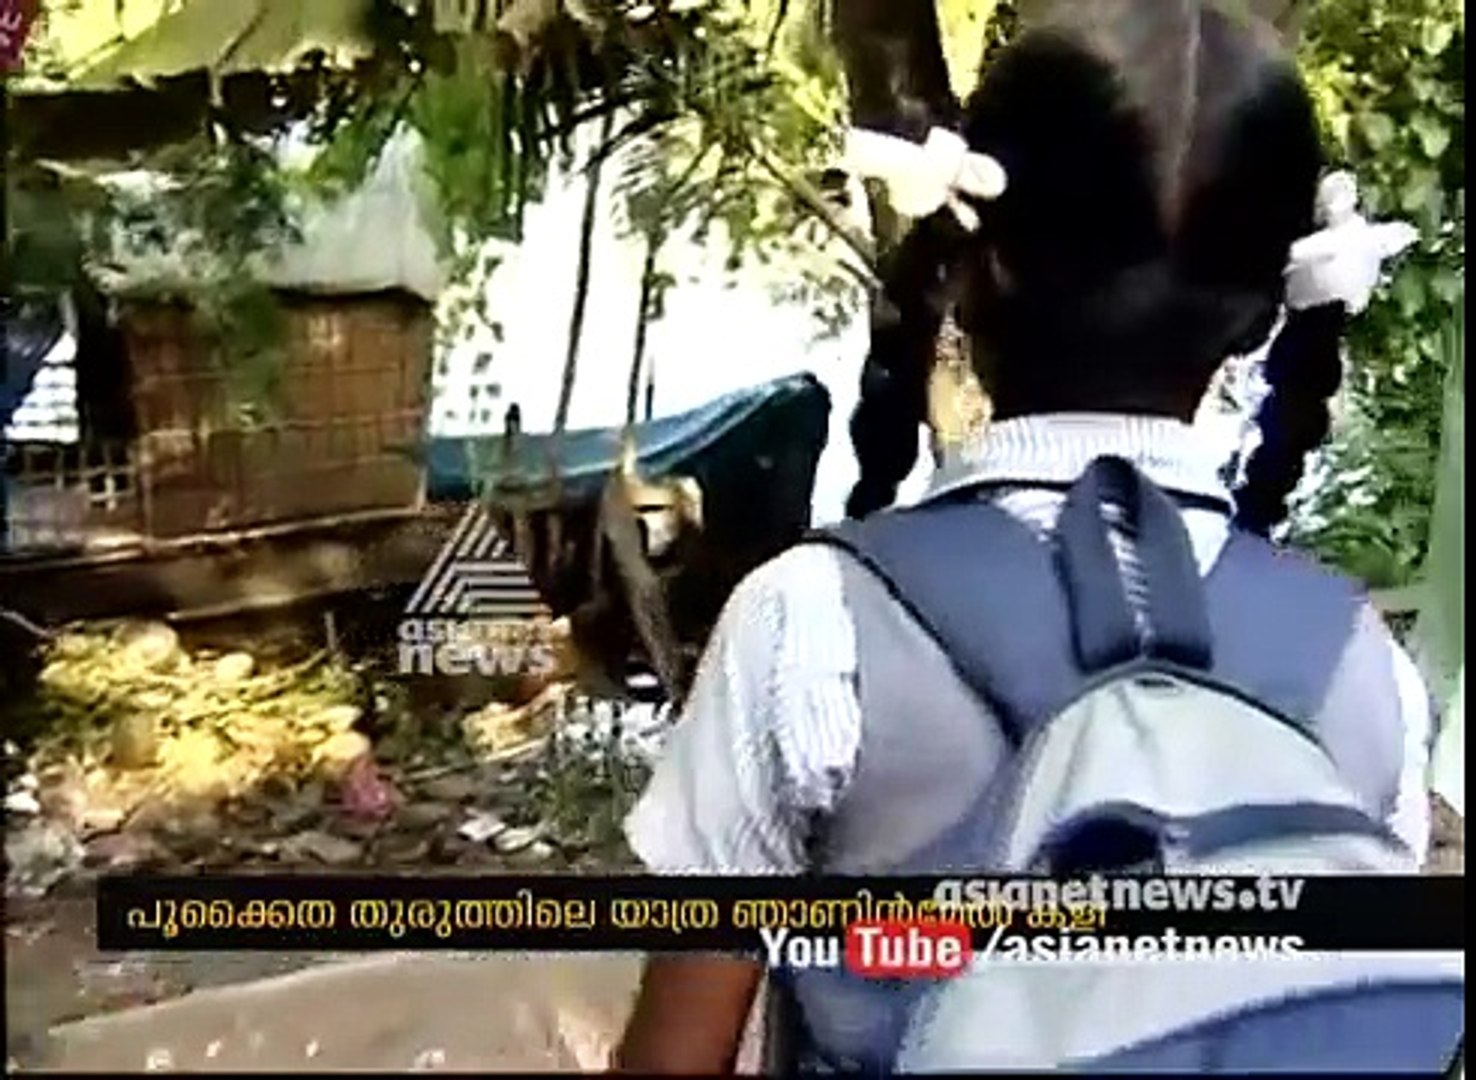 Child Editor Shiva Ranjini | Anusree from paravoor, She Need to travel in canoe to go school